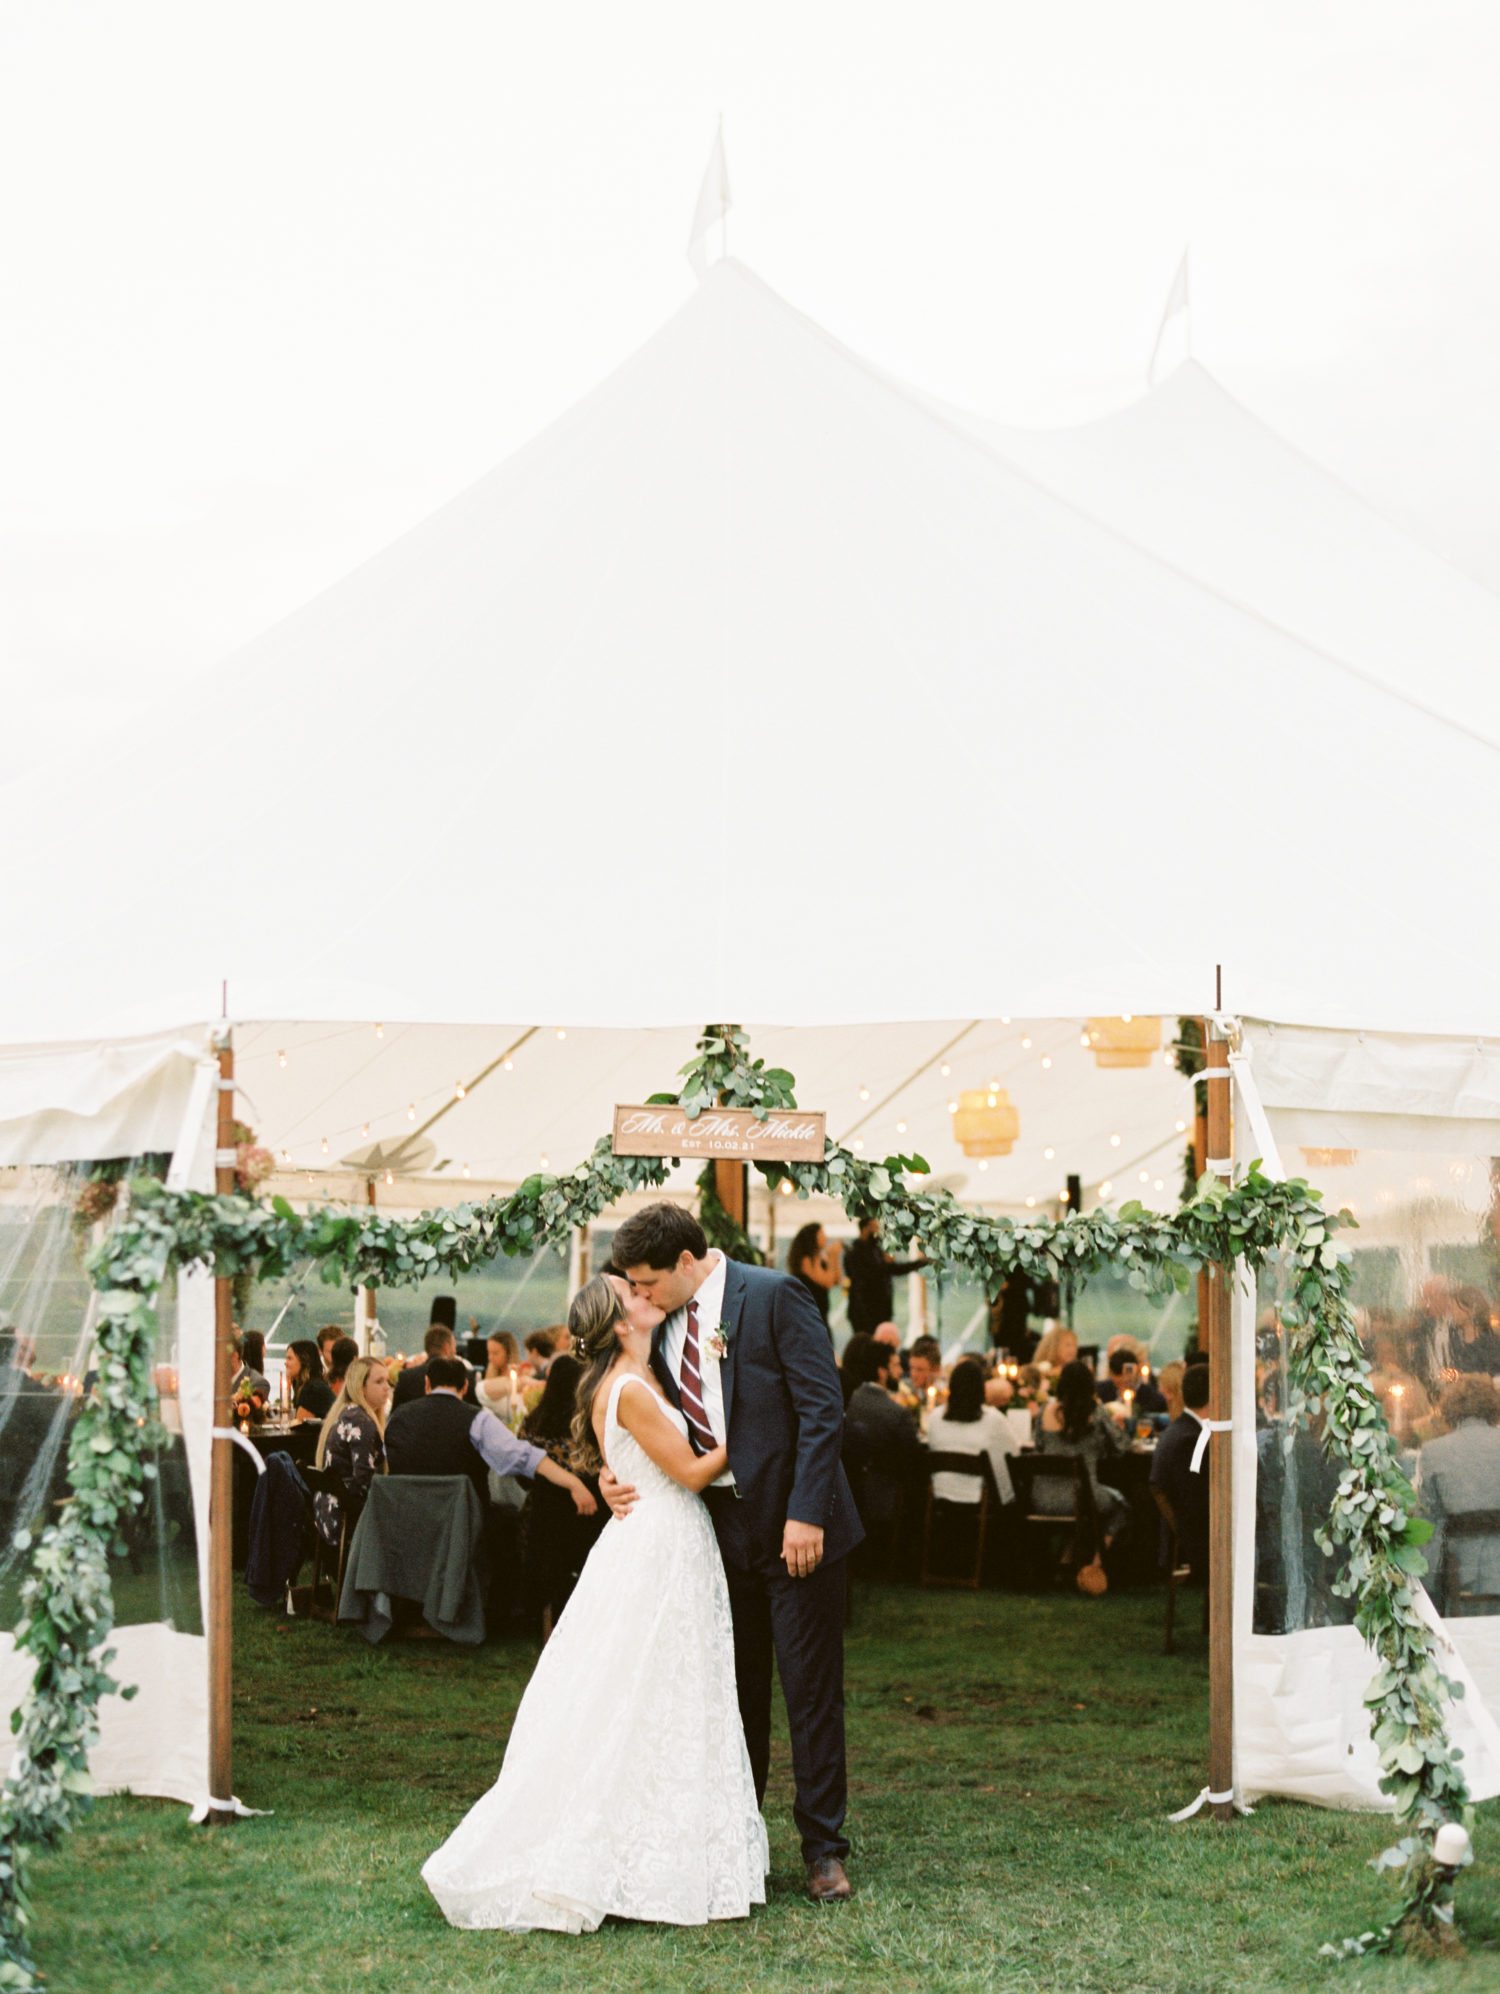 The sleepy town of Brattleboro was the perfect location for this tented Vermont fall wedding.